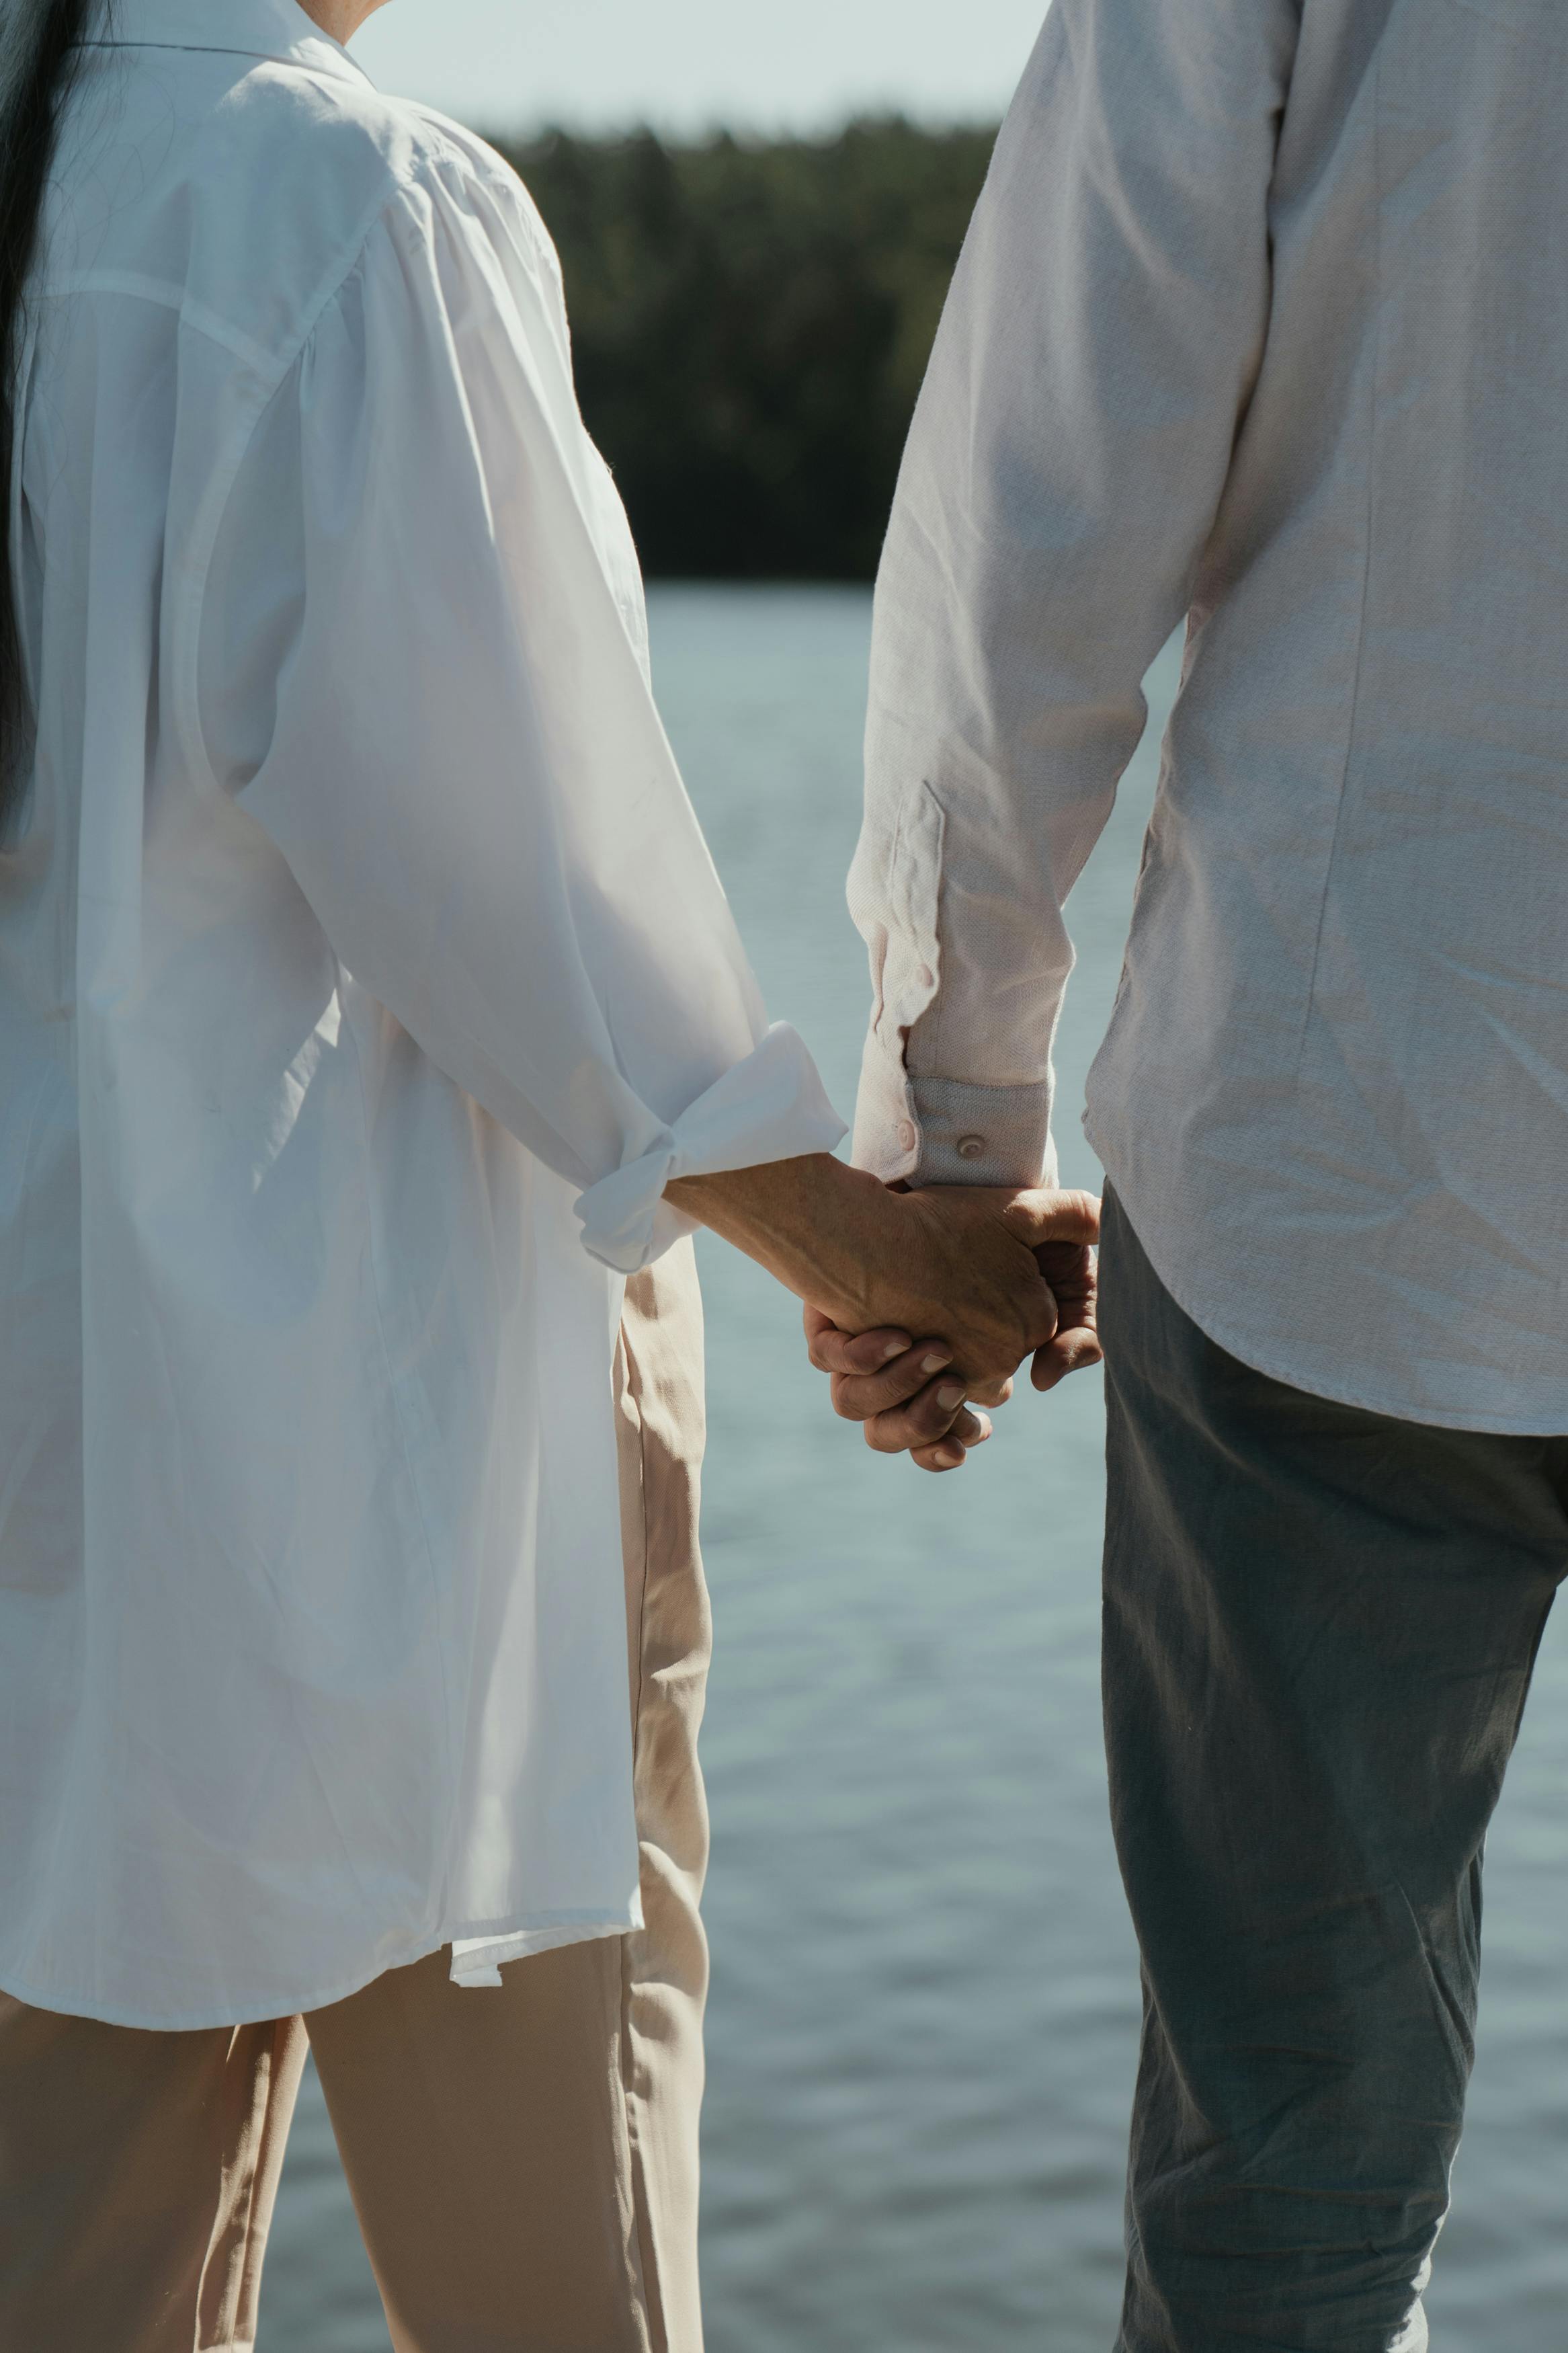 A middle-aged couple holding hands | Source: Pexels